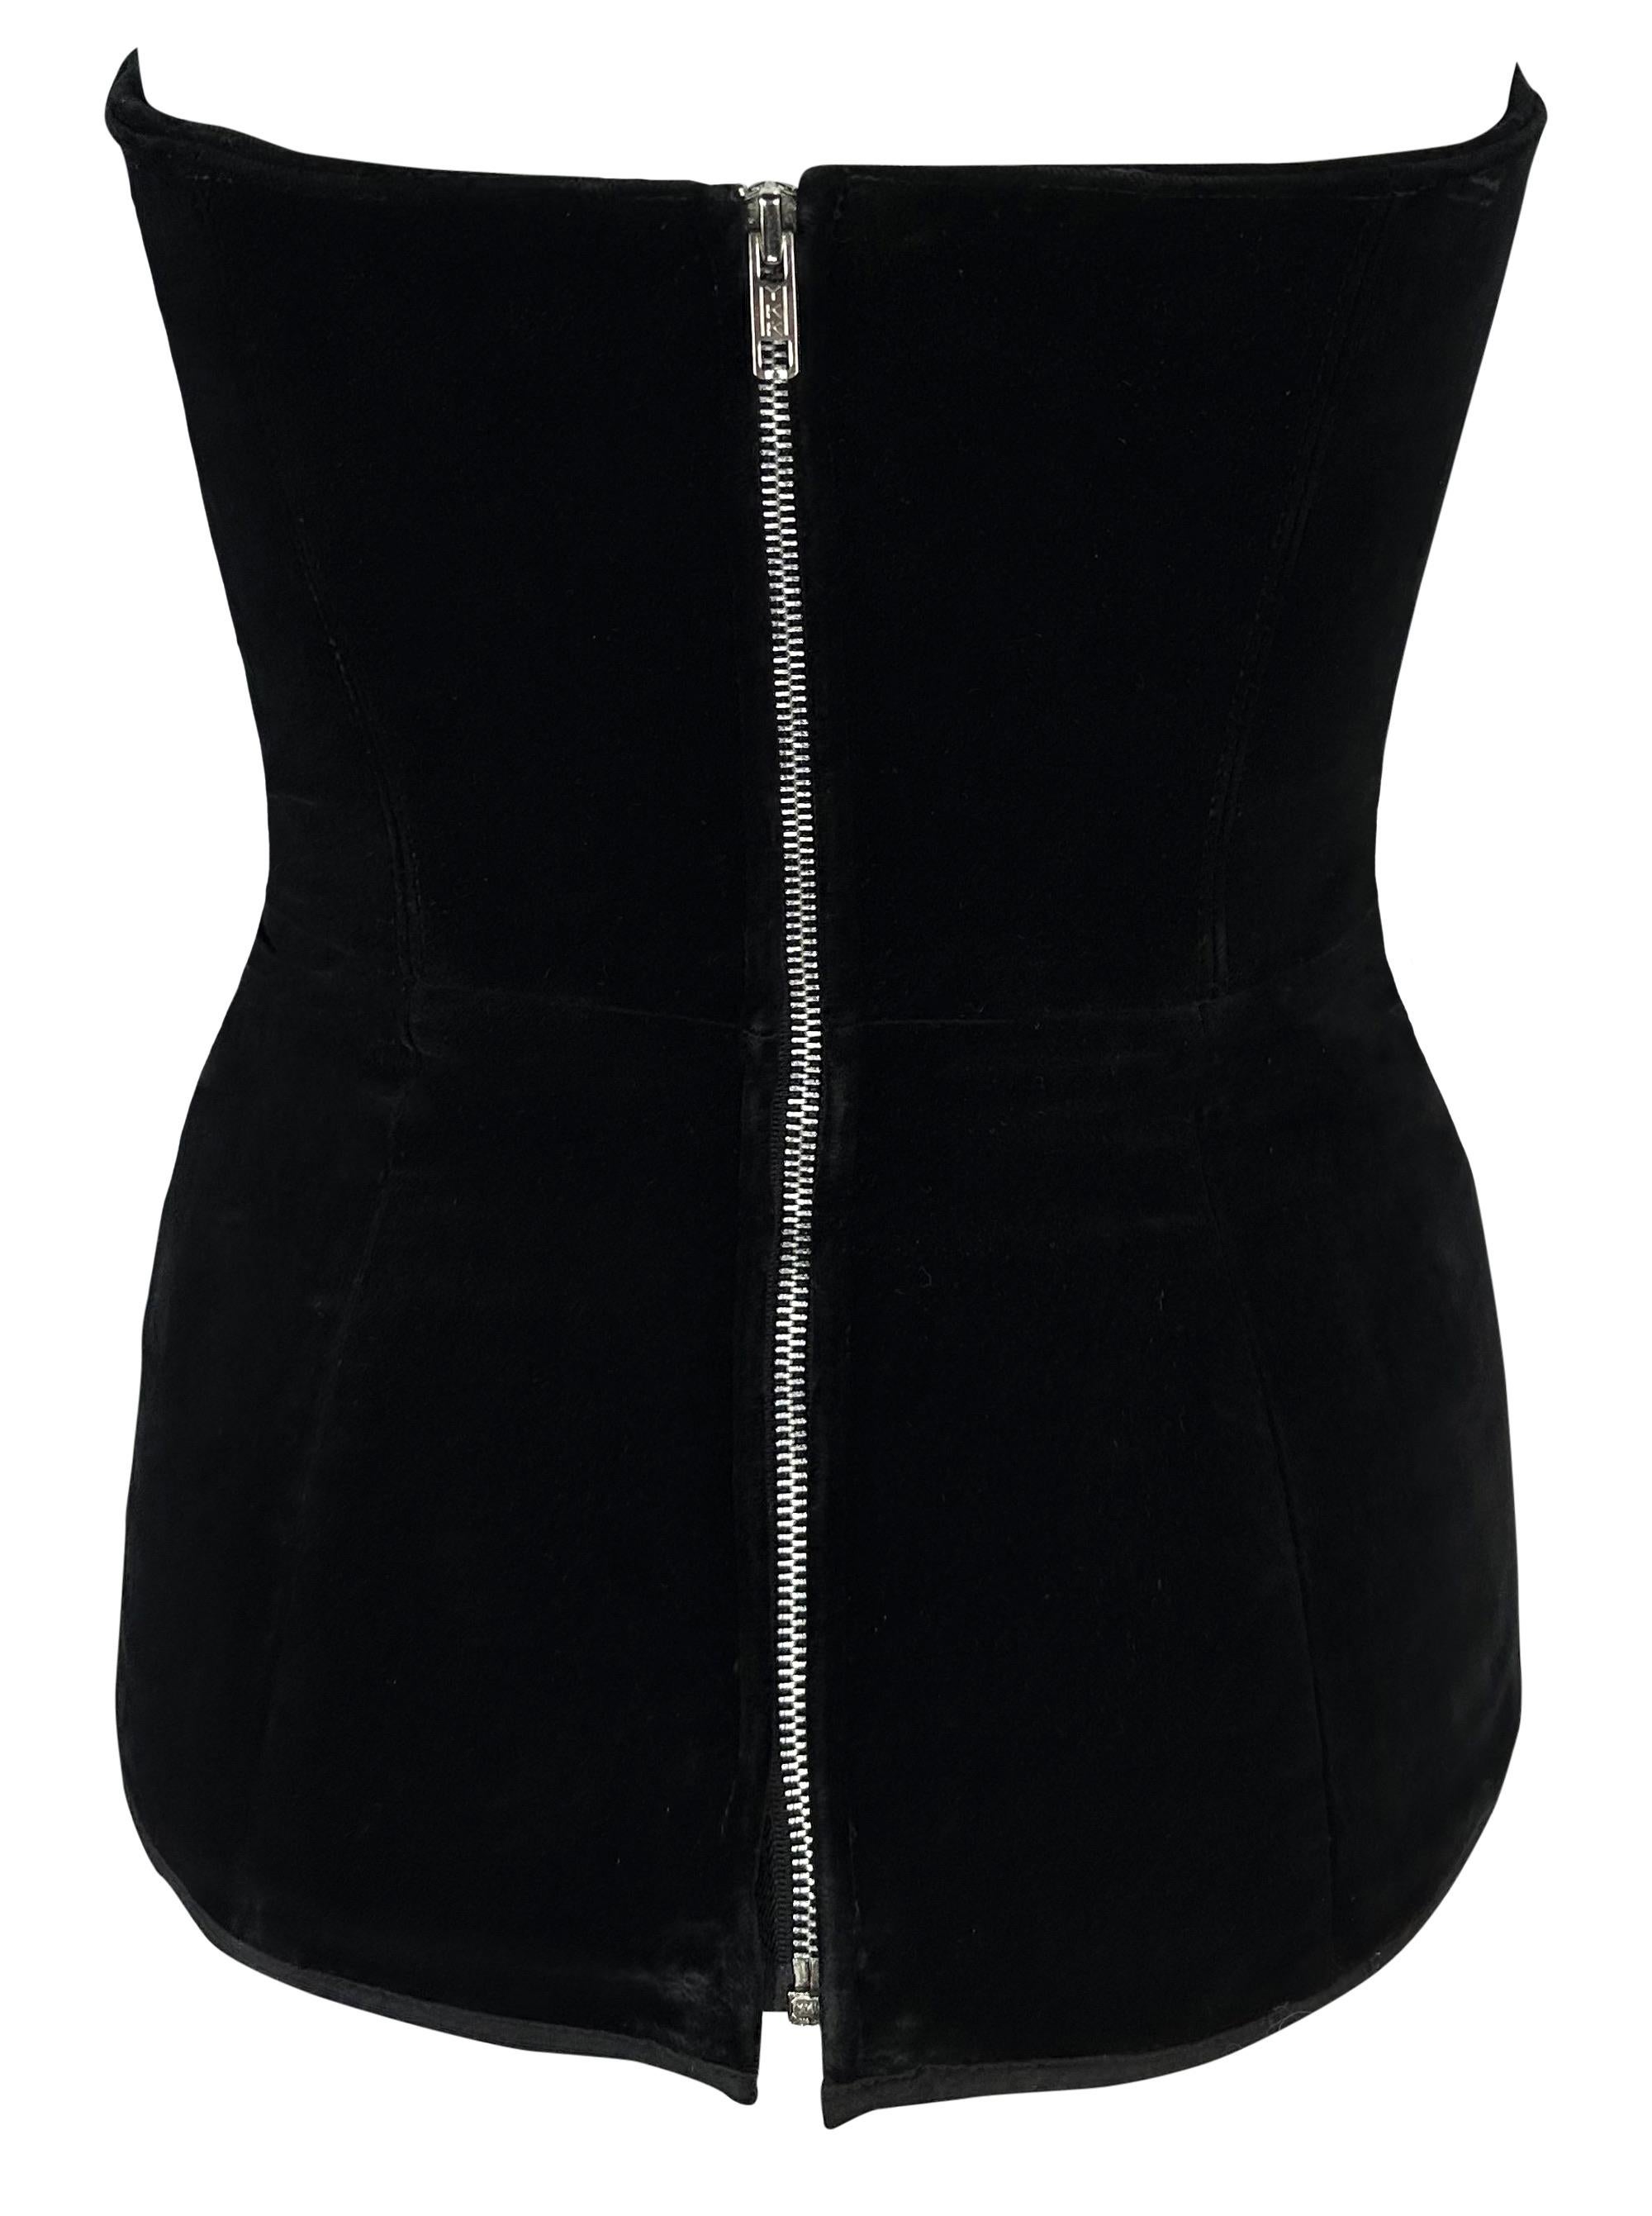 Late 1980s Thierry Mugler Velvet Lace-Up Pointed Strapless Bustier Corset Black For Sale 3